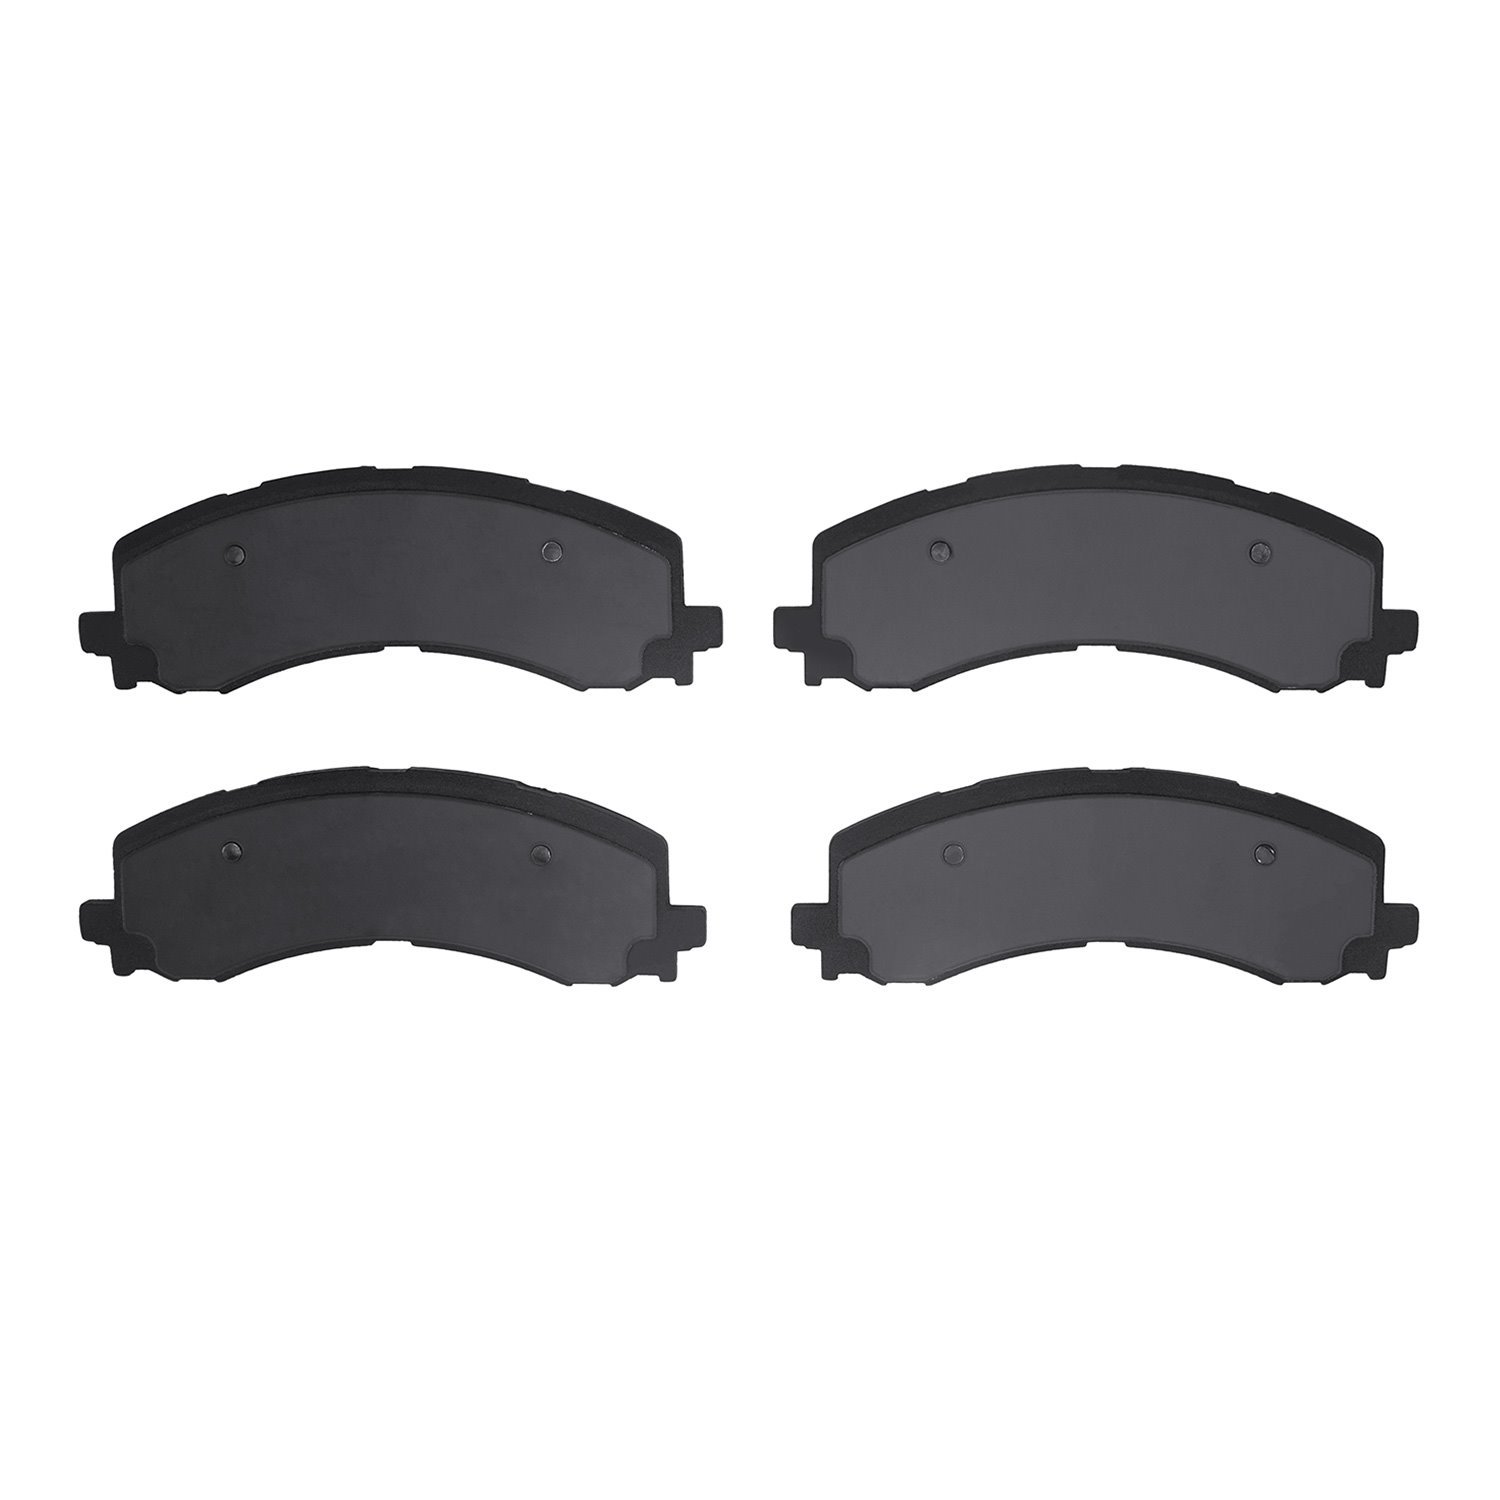 1551-2382-00 5000 Advanced Ceramic Brake Pads, Fits Select Ford/Lincoln/Mercury/Mazda, Position: Front